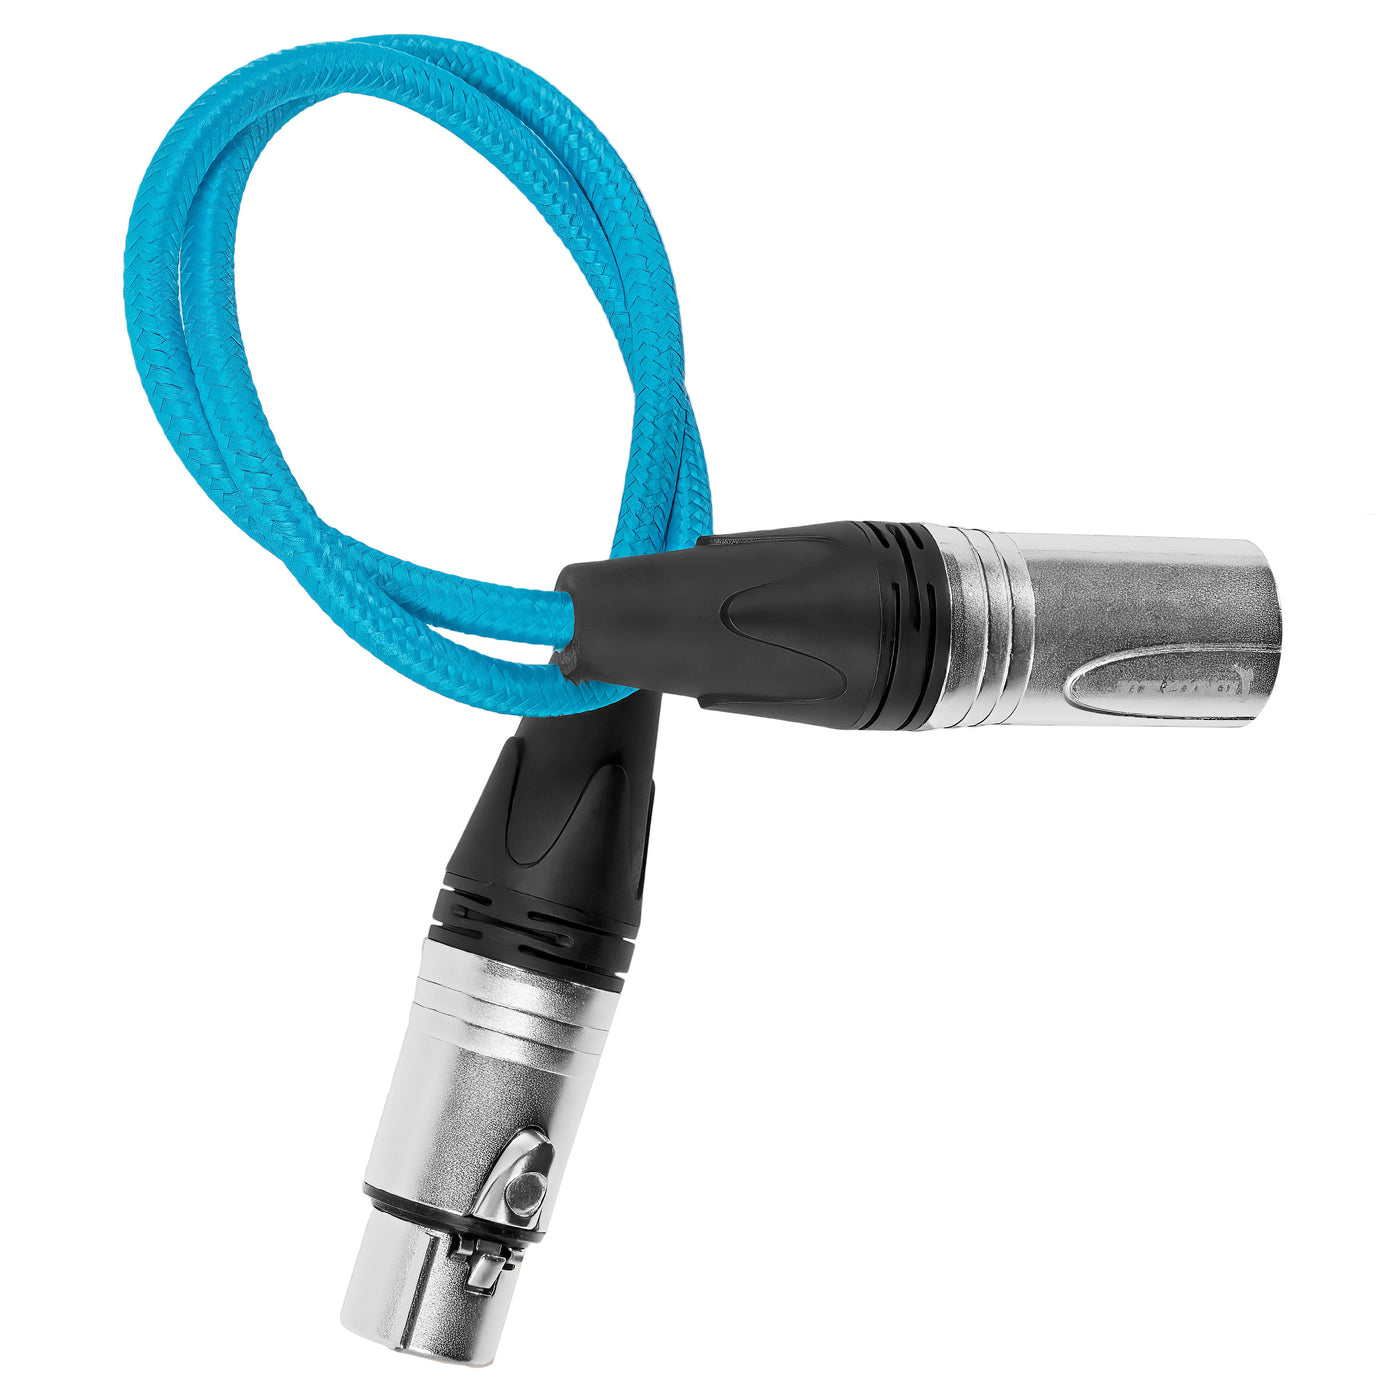 18" Male XLR to Female XLR Audio Cable for On-Camera Mics